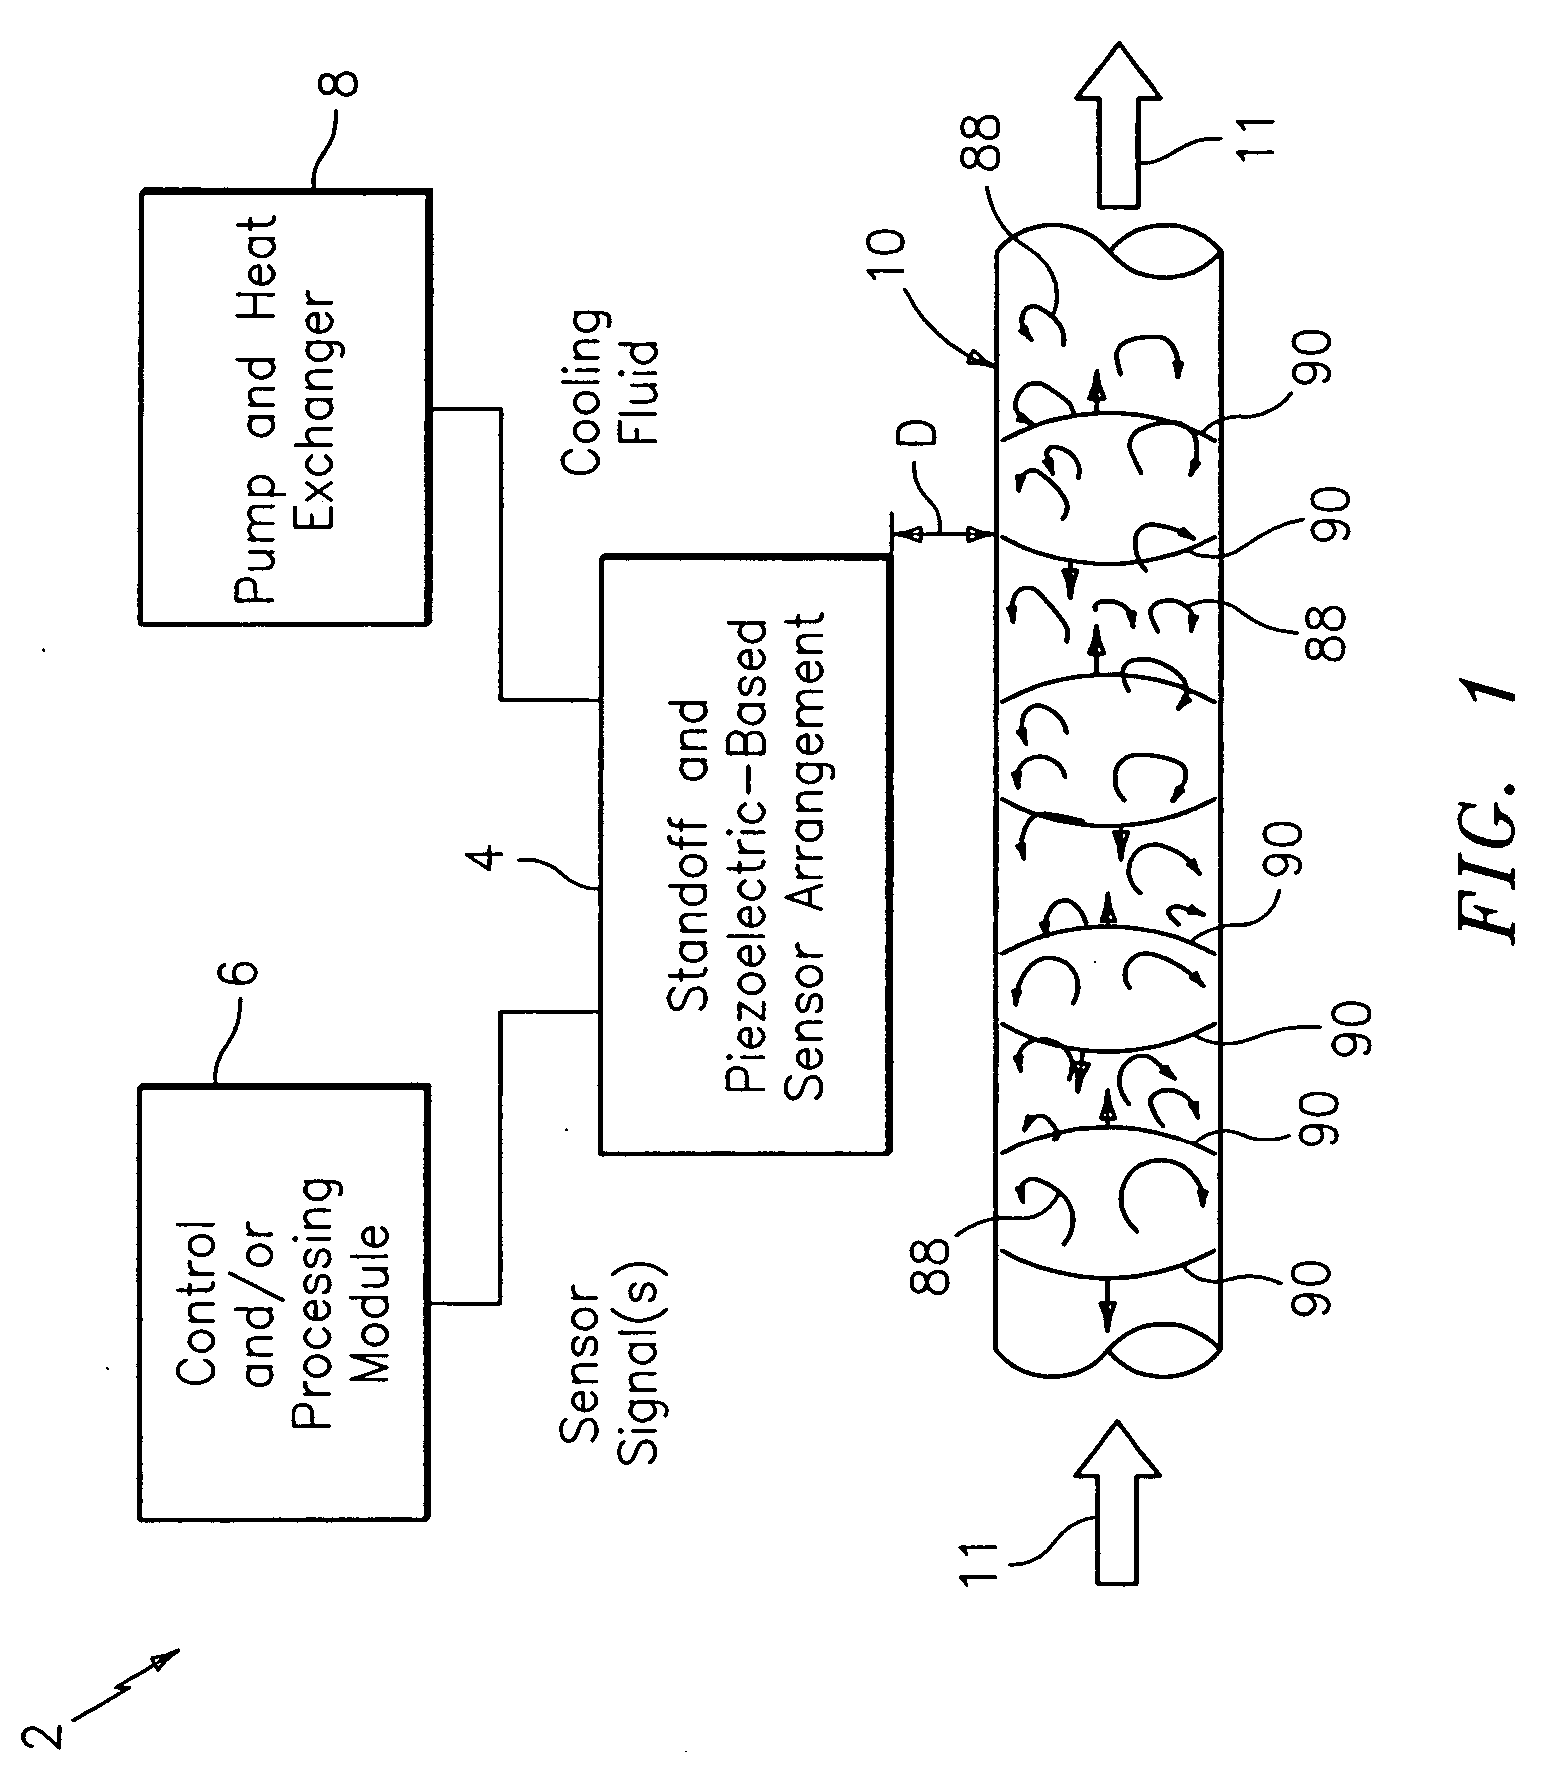 Method and apparatus for measuring a parameter of a high temperature fluid flowing within a pipe using an array of piezoelectric based flow sensors